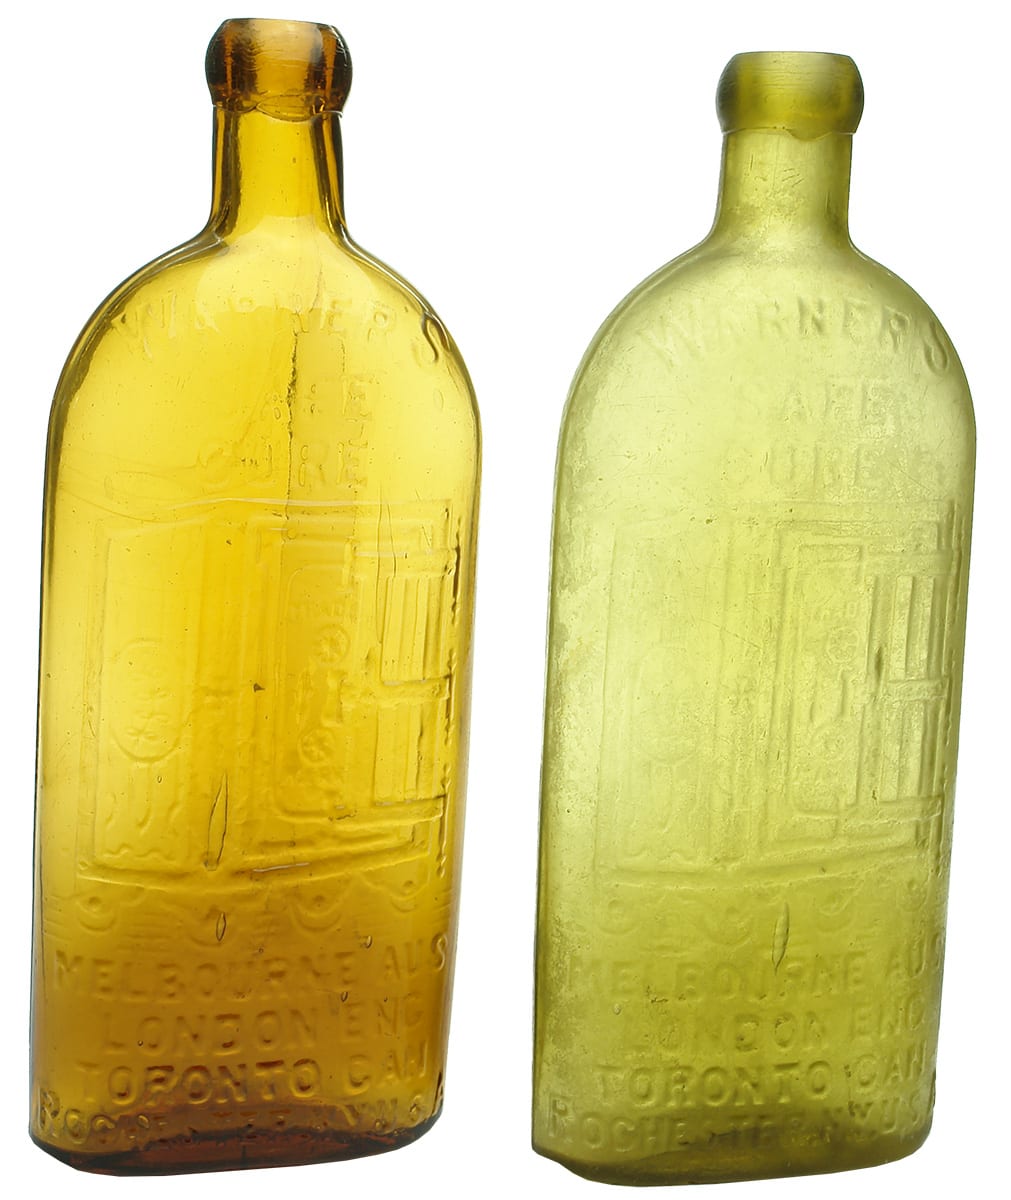 Warners Four Cities Antique Bottles